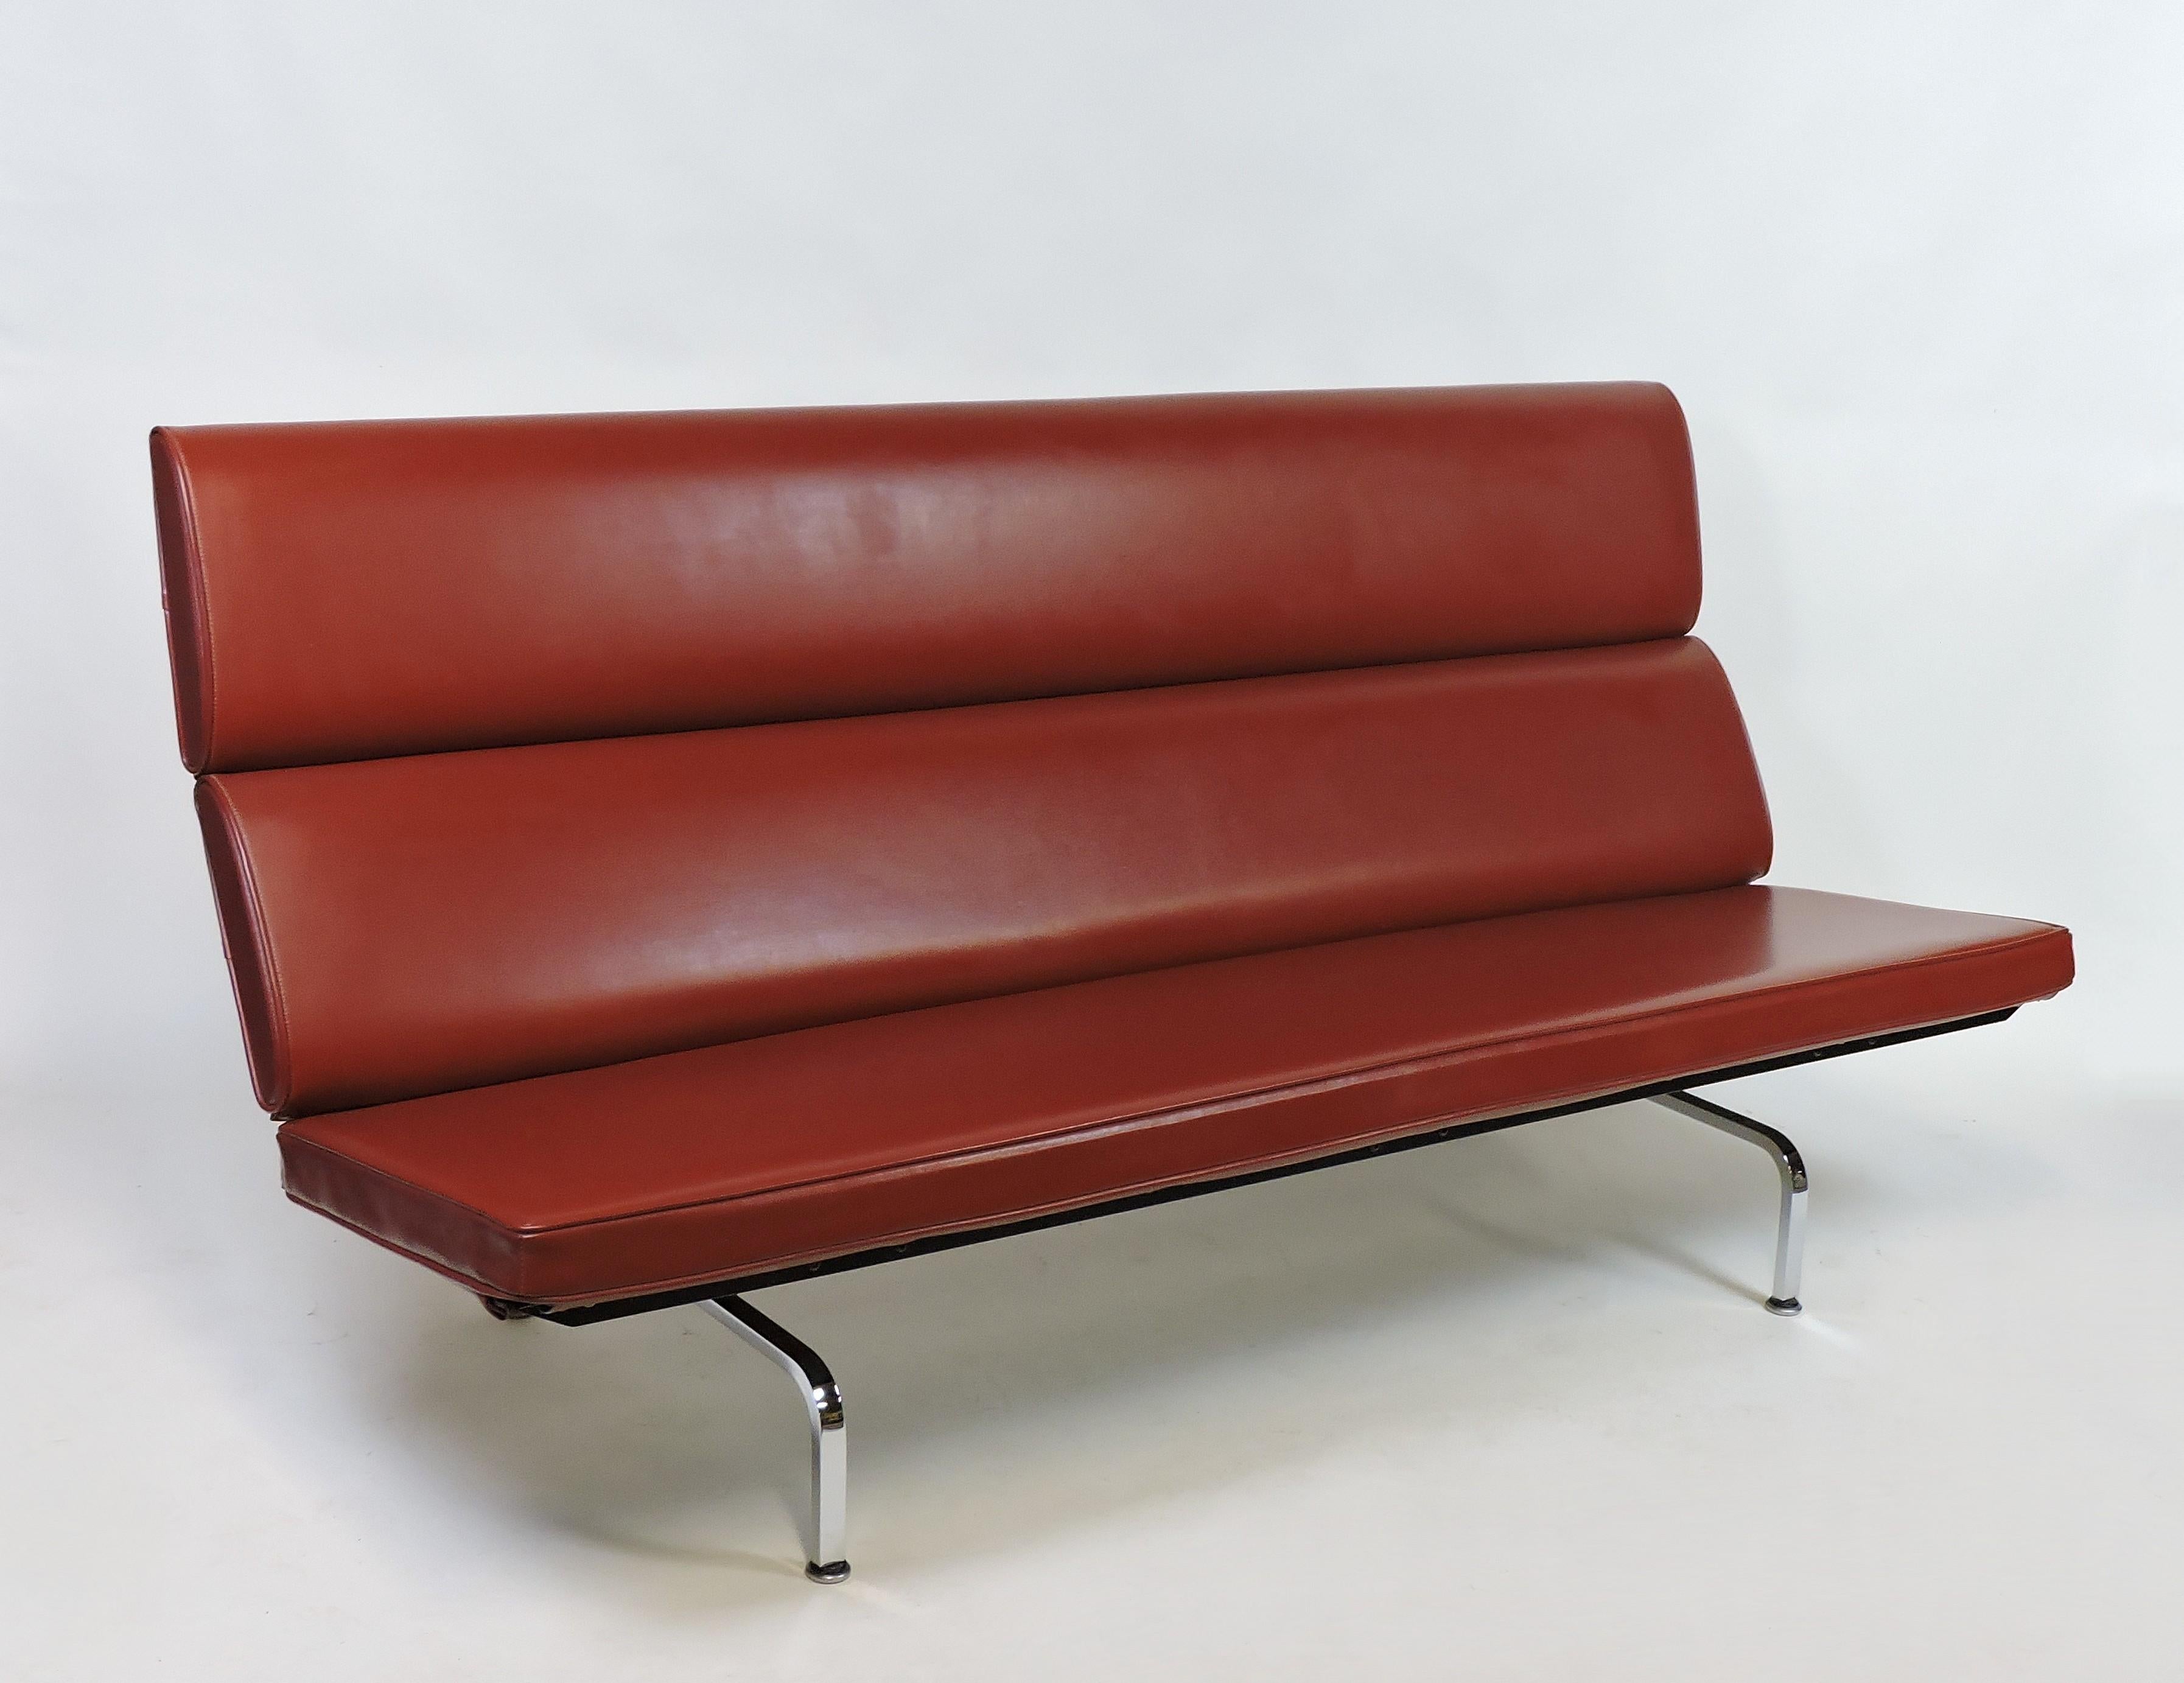 Eames Mid-Century Modern Compact Sofa by Herman Miller 6